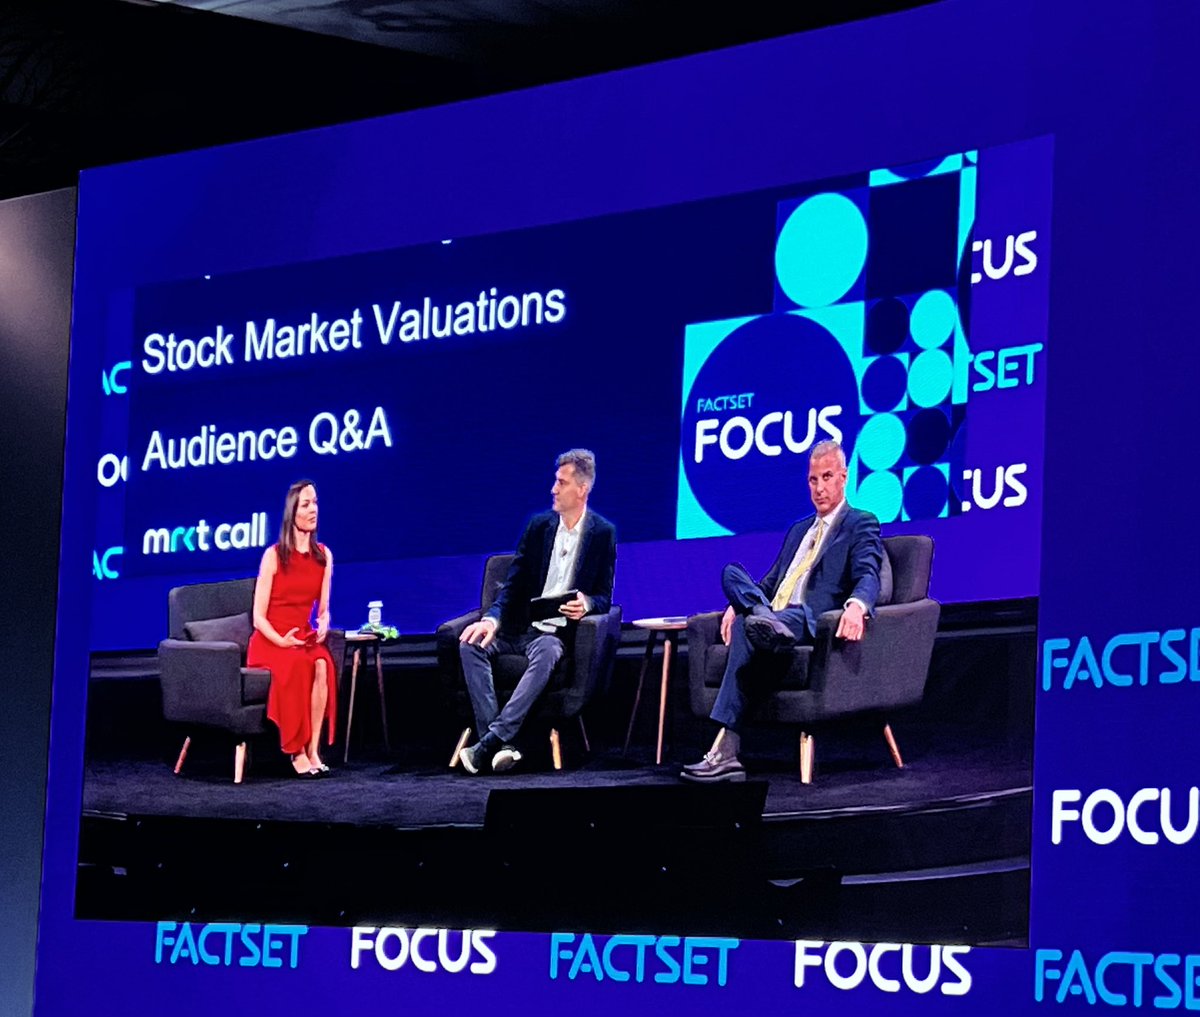 MRKT Call is live from @FactSet’s Focus Conference in Miami! @GuyAdami, @LizYoungStrat and @RiskReversal will preview the Fed meeting, $AMZN $AAPL earnings & hit the biggest movers today. Watch at 1:15pm youtube.com/live/OWMiH-OEe…